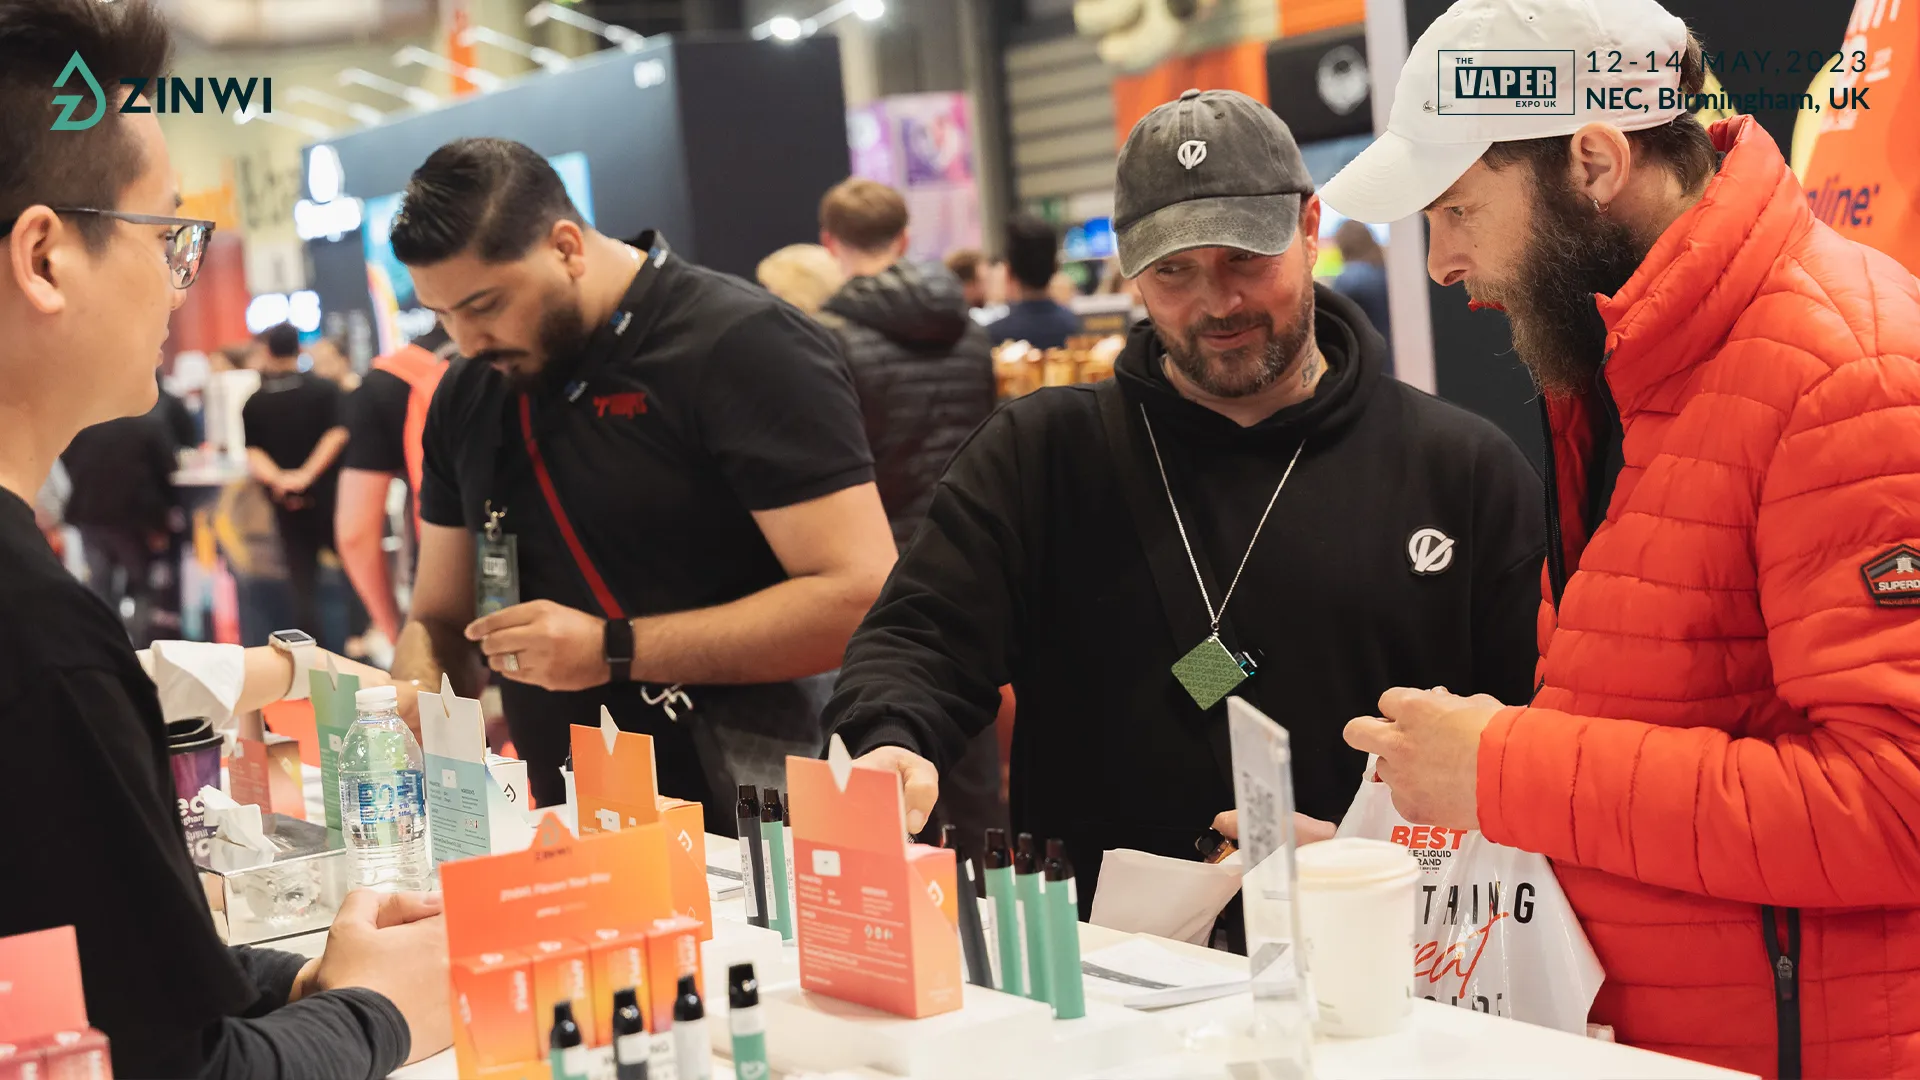 Zinwi showed strength in customized flavoring at the Vaper Expo UK